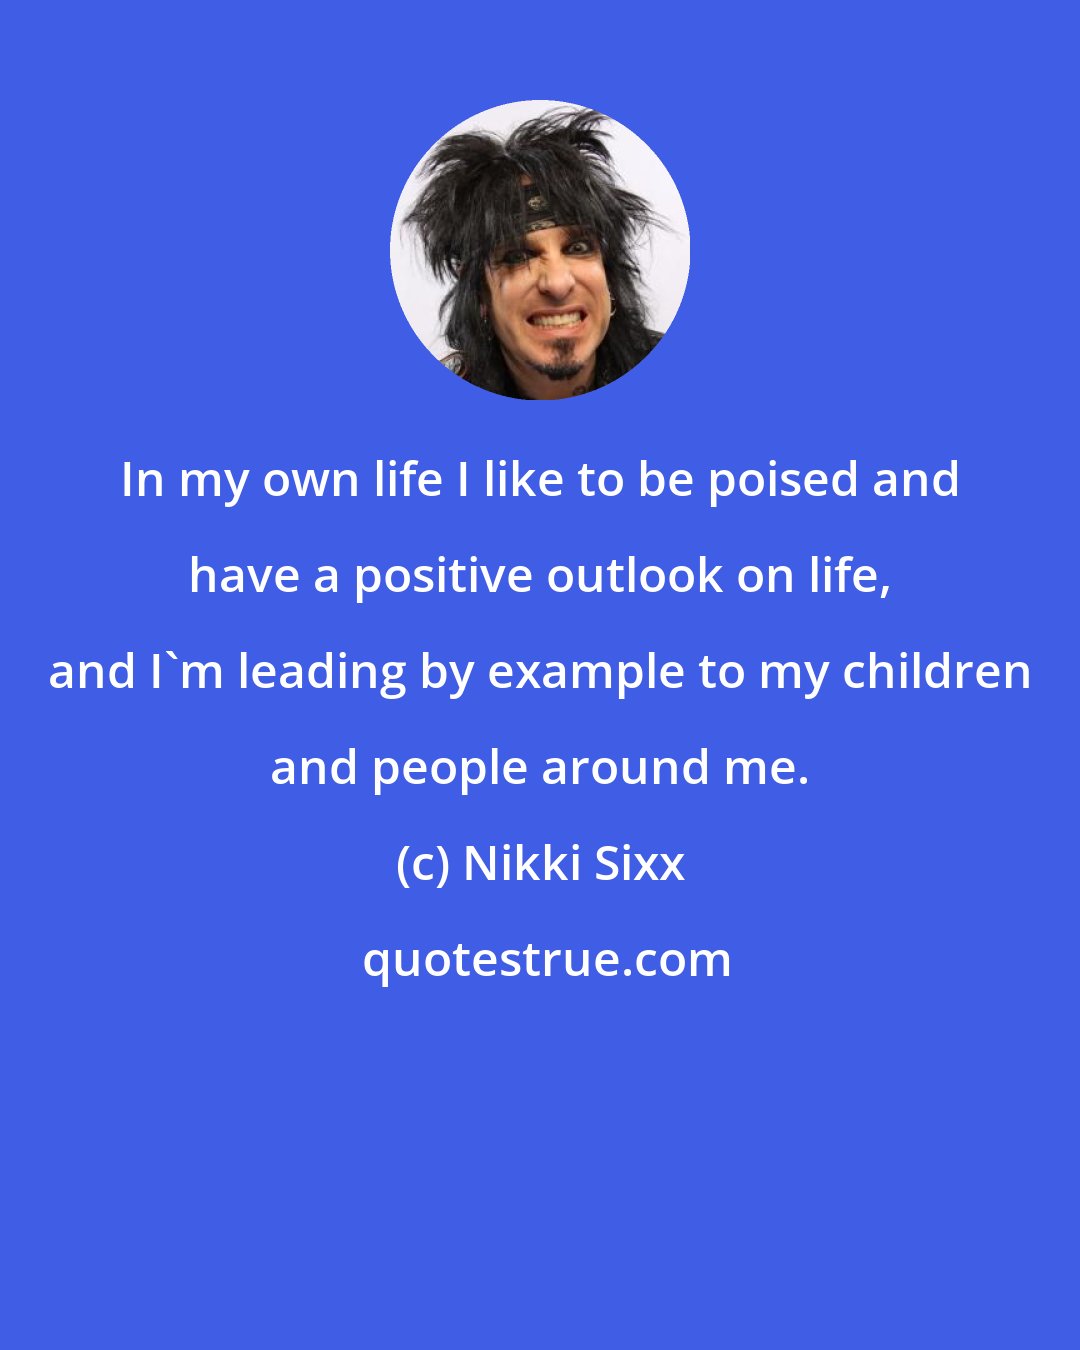 Nikki Sixx: In my own life I like to be poised and have a positive outlook on life, and I'm leading by example to my children and people around me.